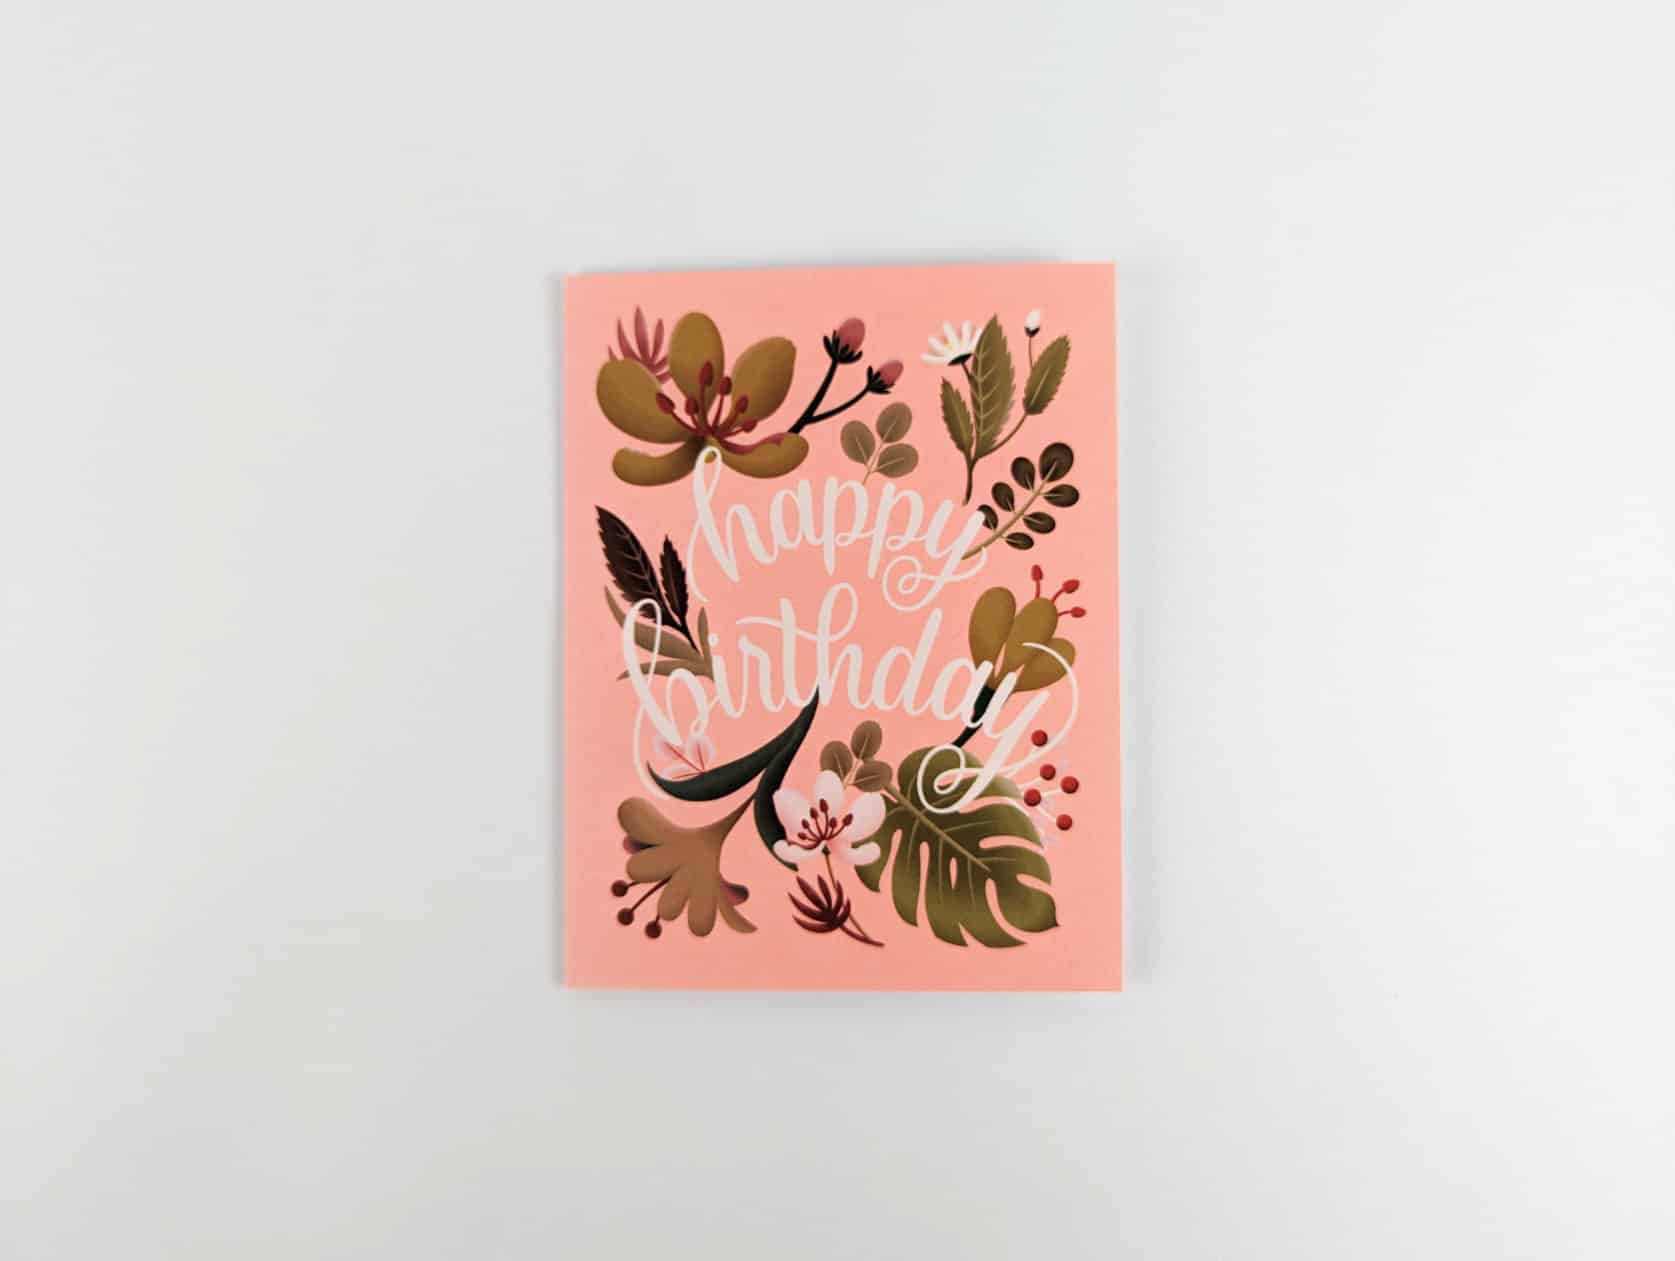 Coral card with white cursive text in the centre that reads: happy birthday. A variety of pink, white and green tropical flowers and foliage are featured around the text.